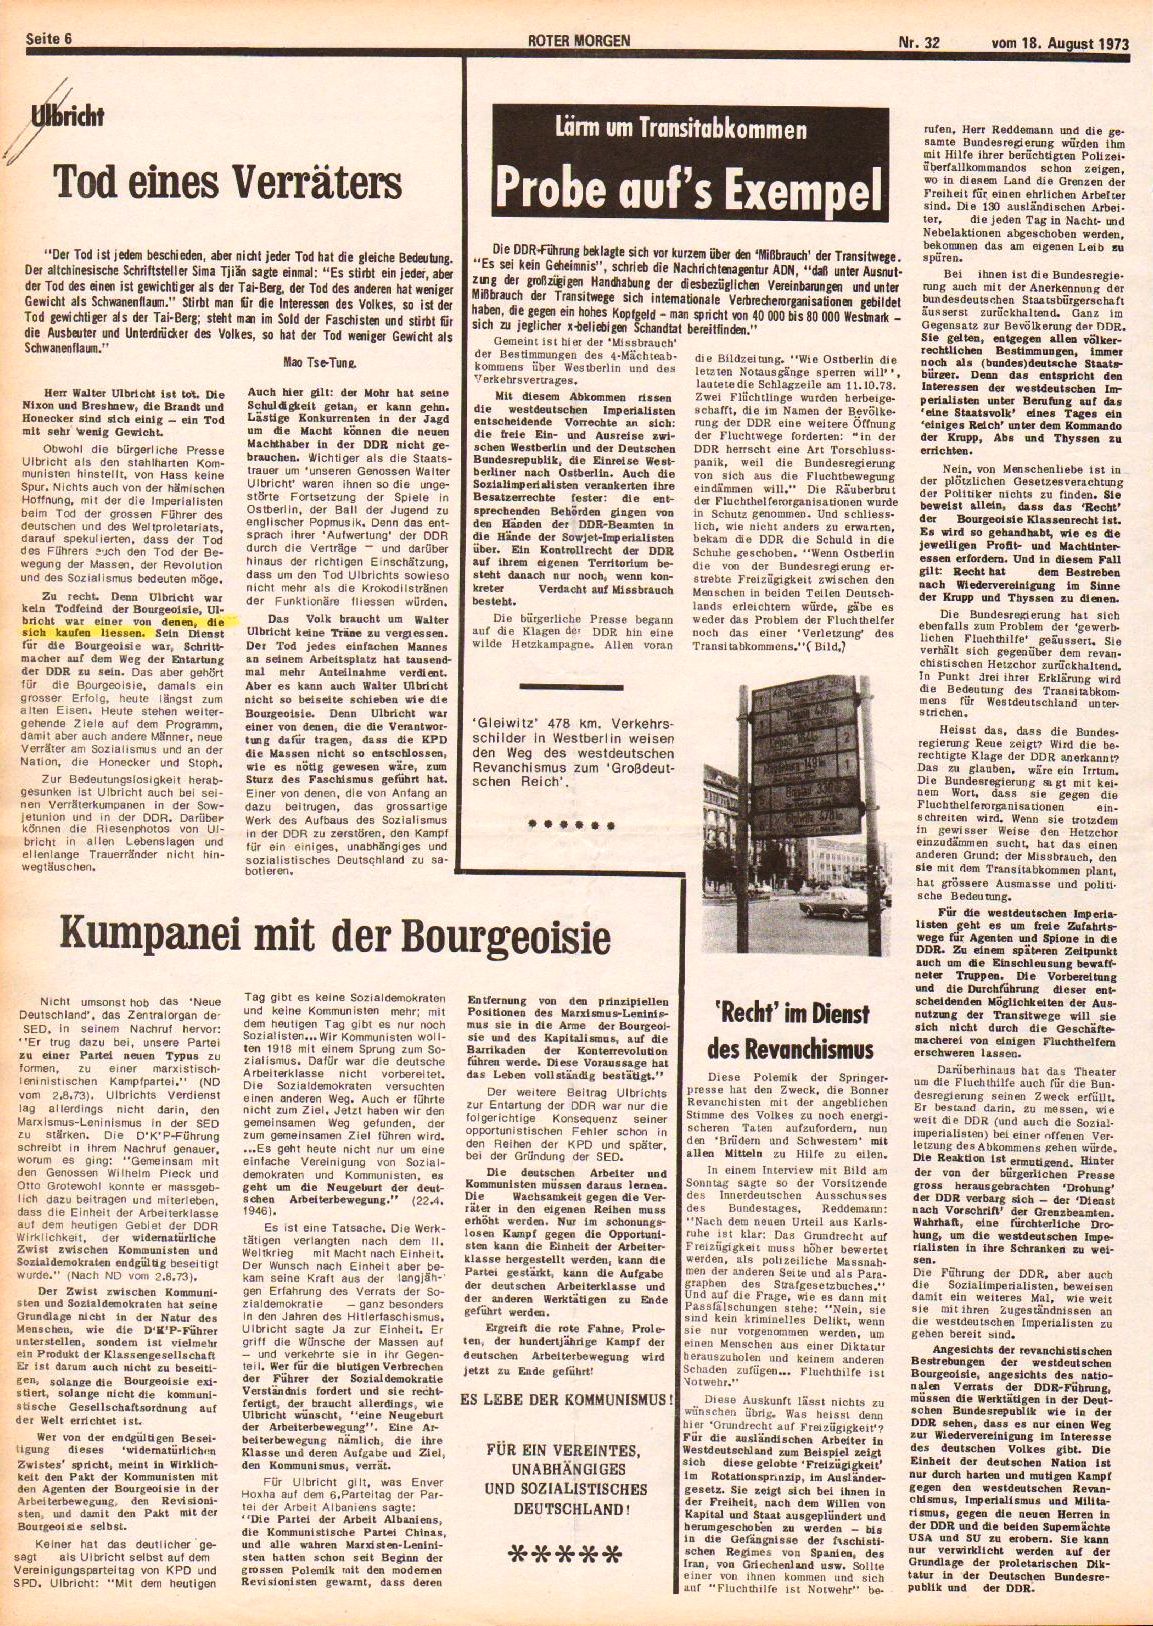 Roter Morgen, 7. Jg., 18. August 1973, Nr. 32, Seite 6